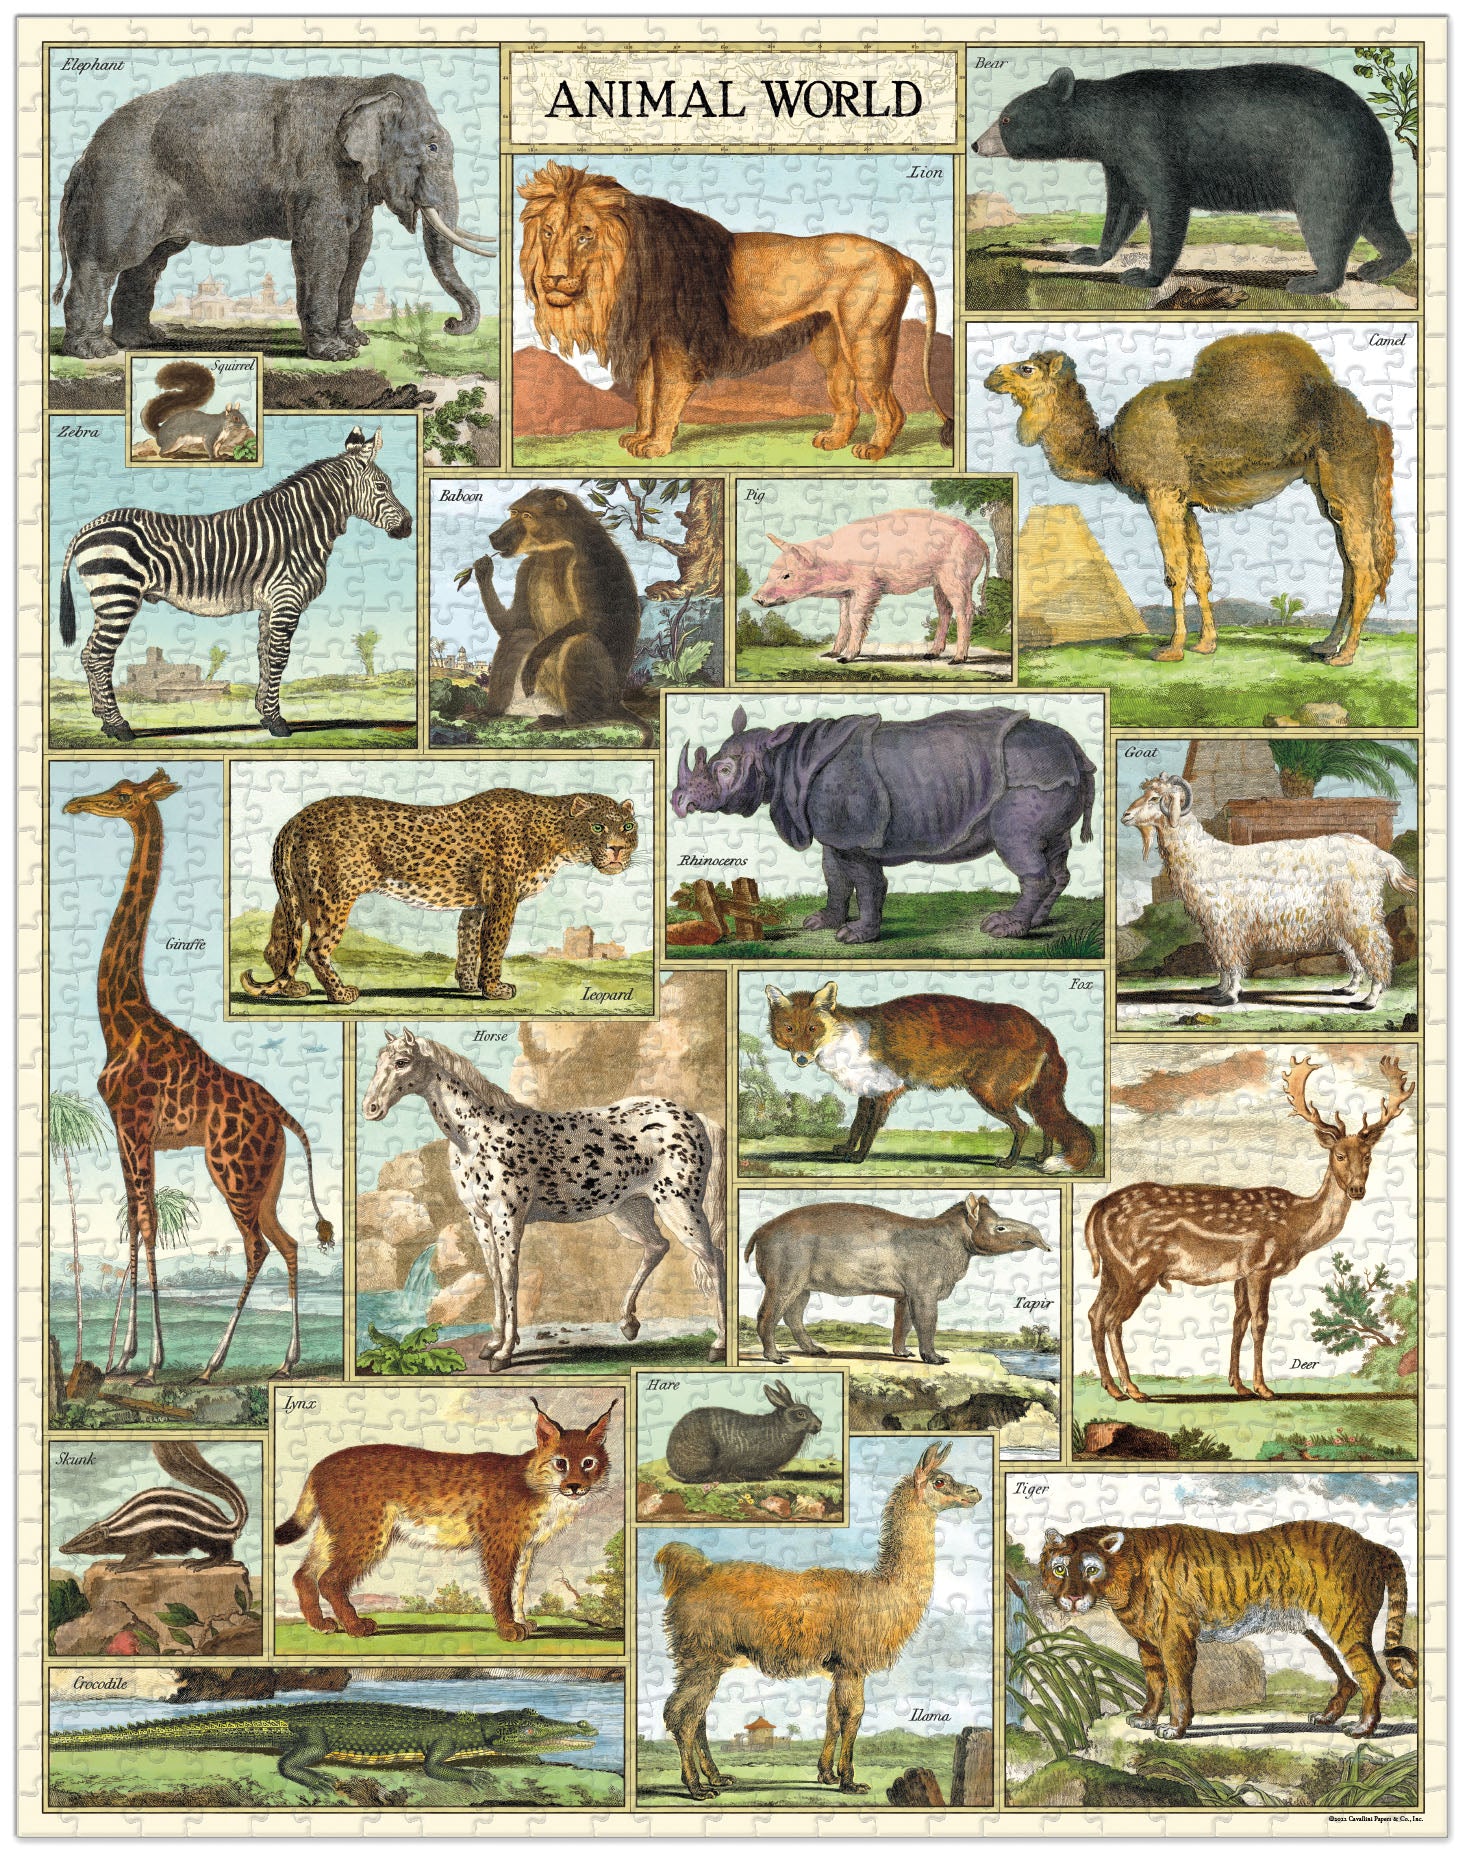 This puzzle features a collection of animals from around the world- zebra, horse, goat, and skunk, and of course a lion, tiger and bear!